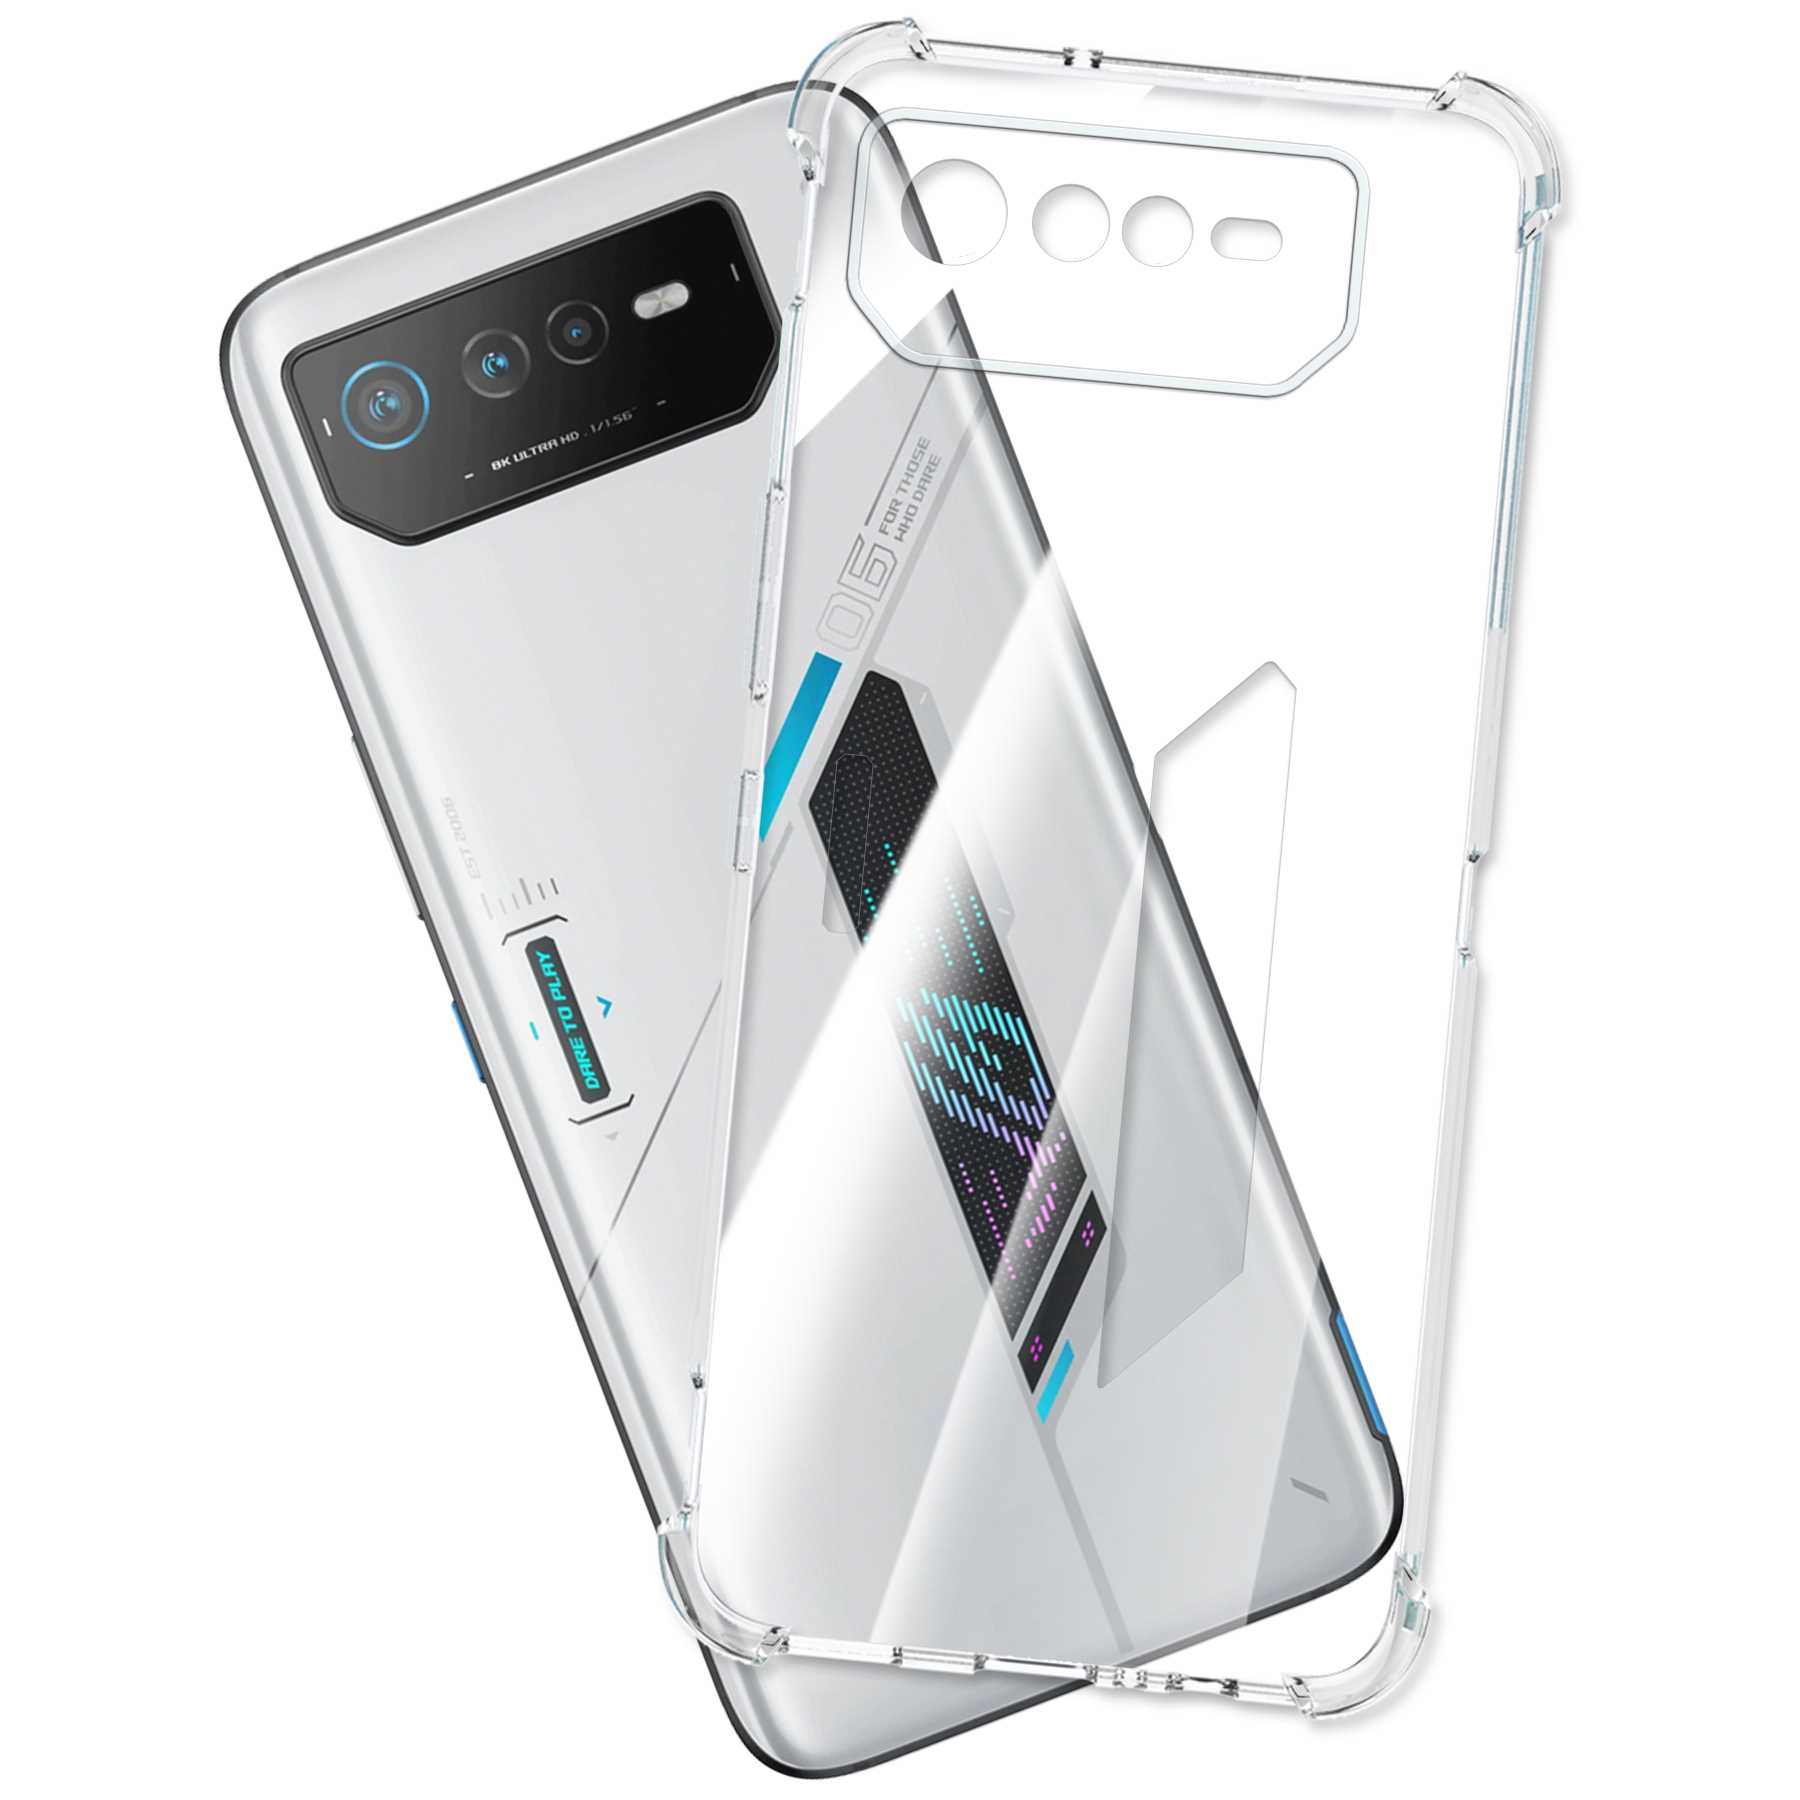 Clear 6, 6D, Case, Backcover, Phone MORE Asus, Transparent ROG ENERGY MTB Armor